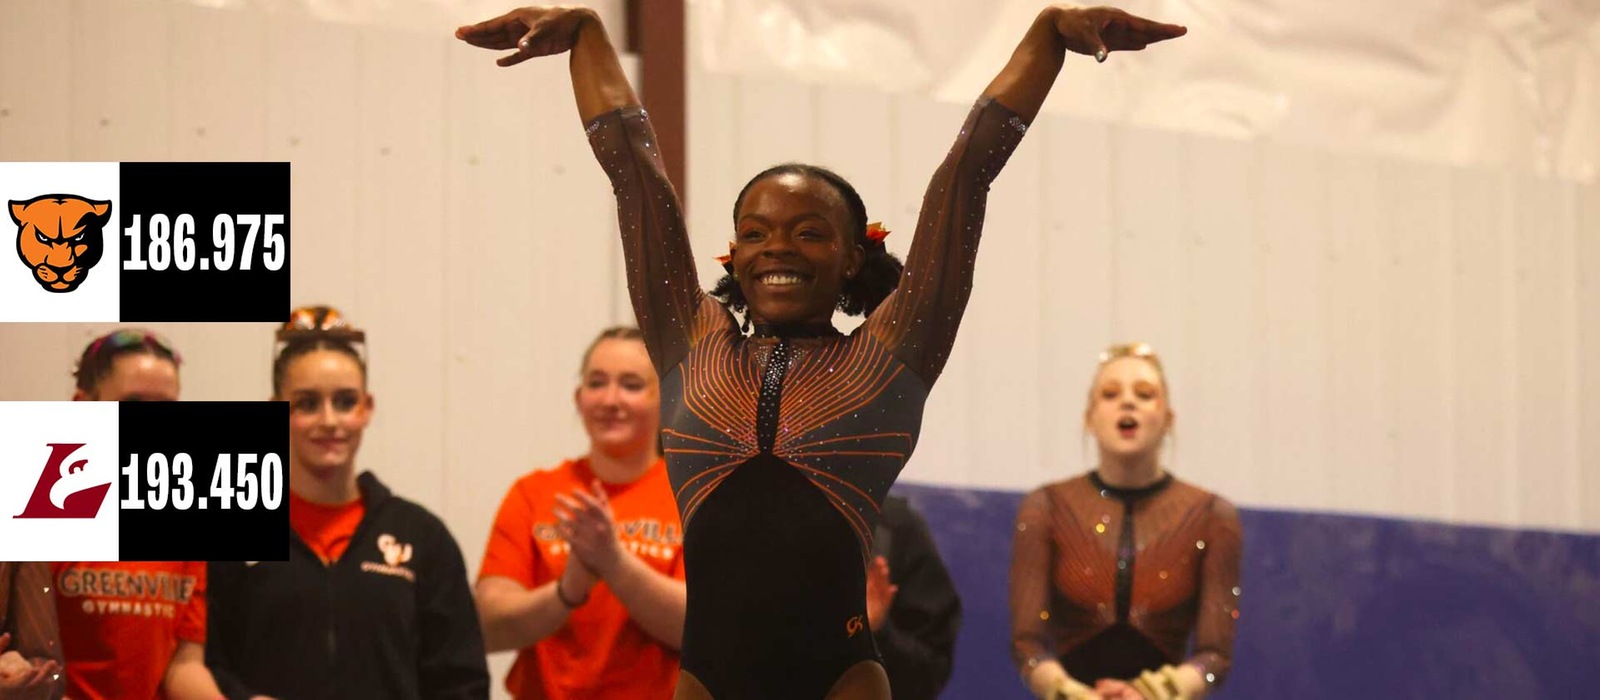 Women's gymnastics establishes new high with score of 186.975 at Wisconsin-Eau Claire